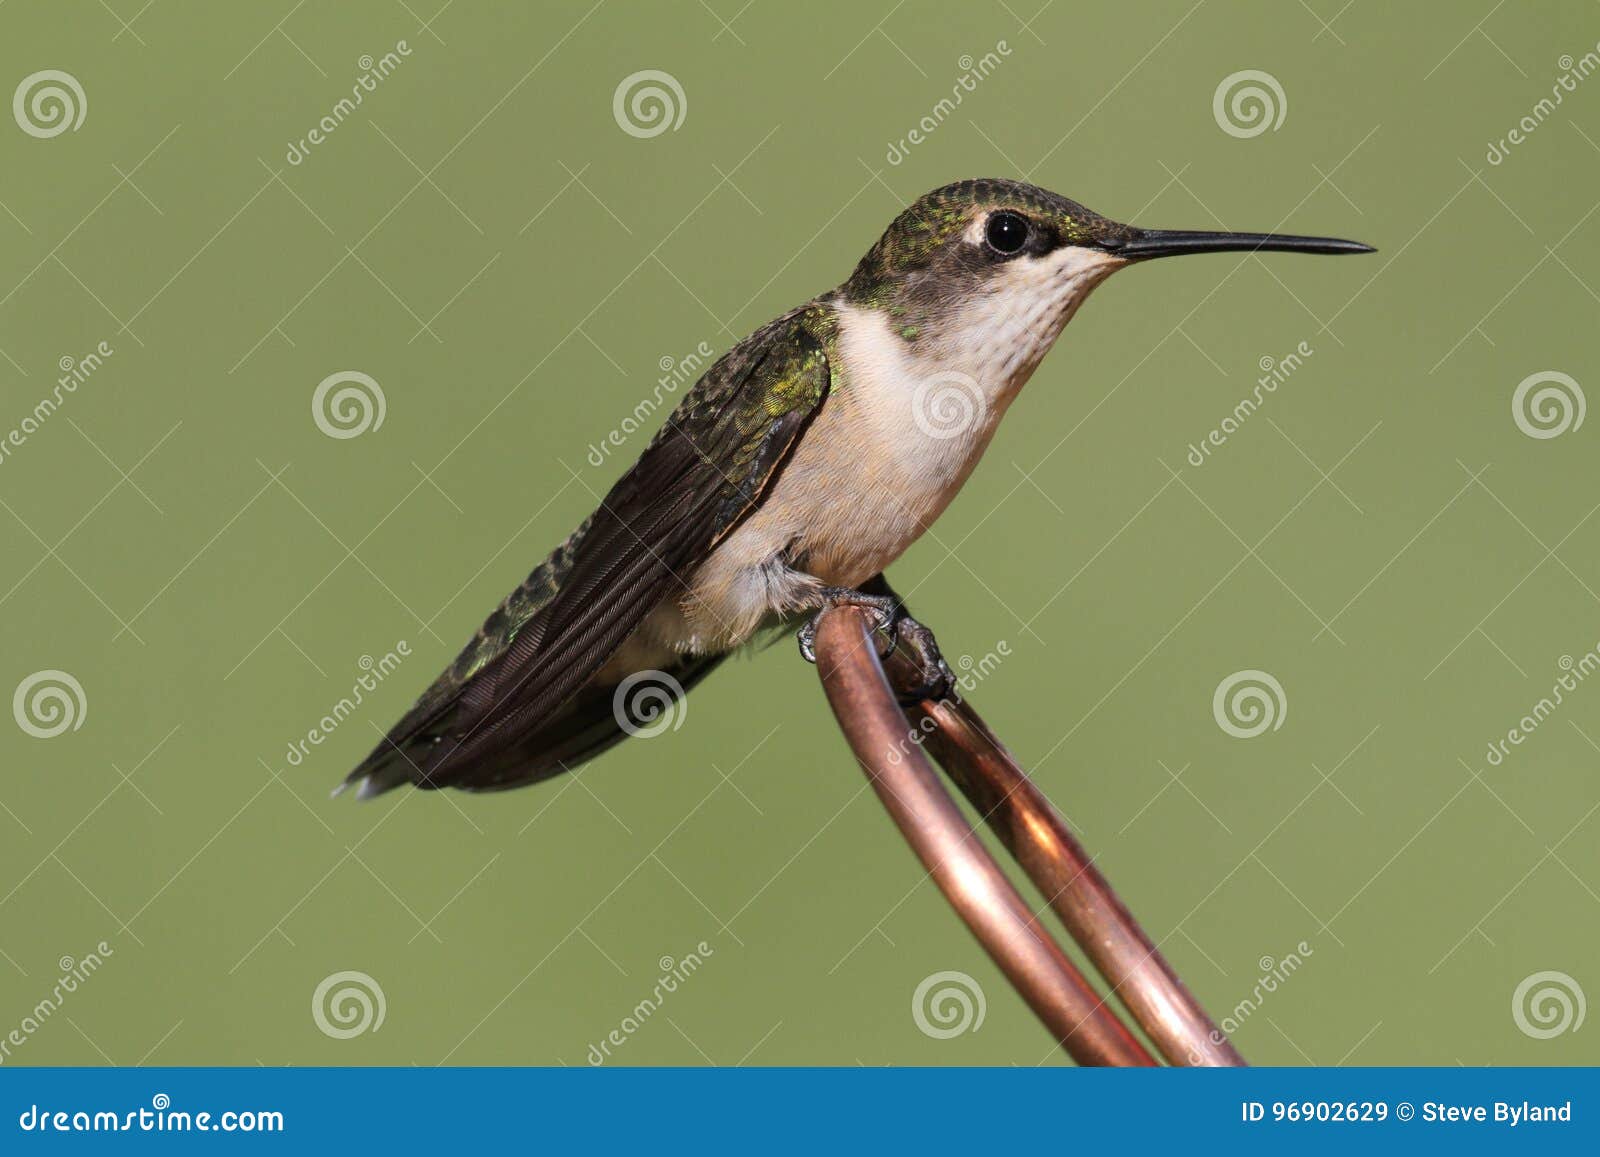 Juvenile Ruby-throated Hummingbird archilochus colubris on a copper perch with a green background